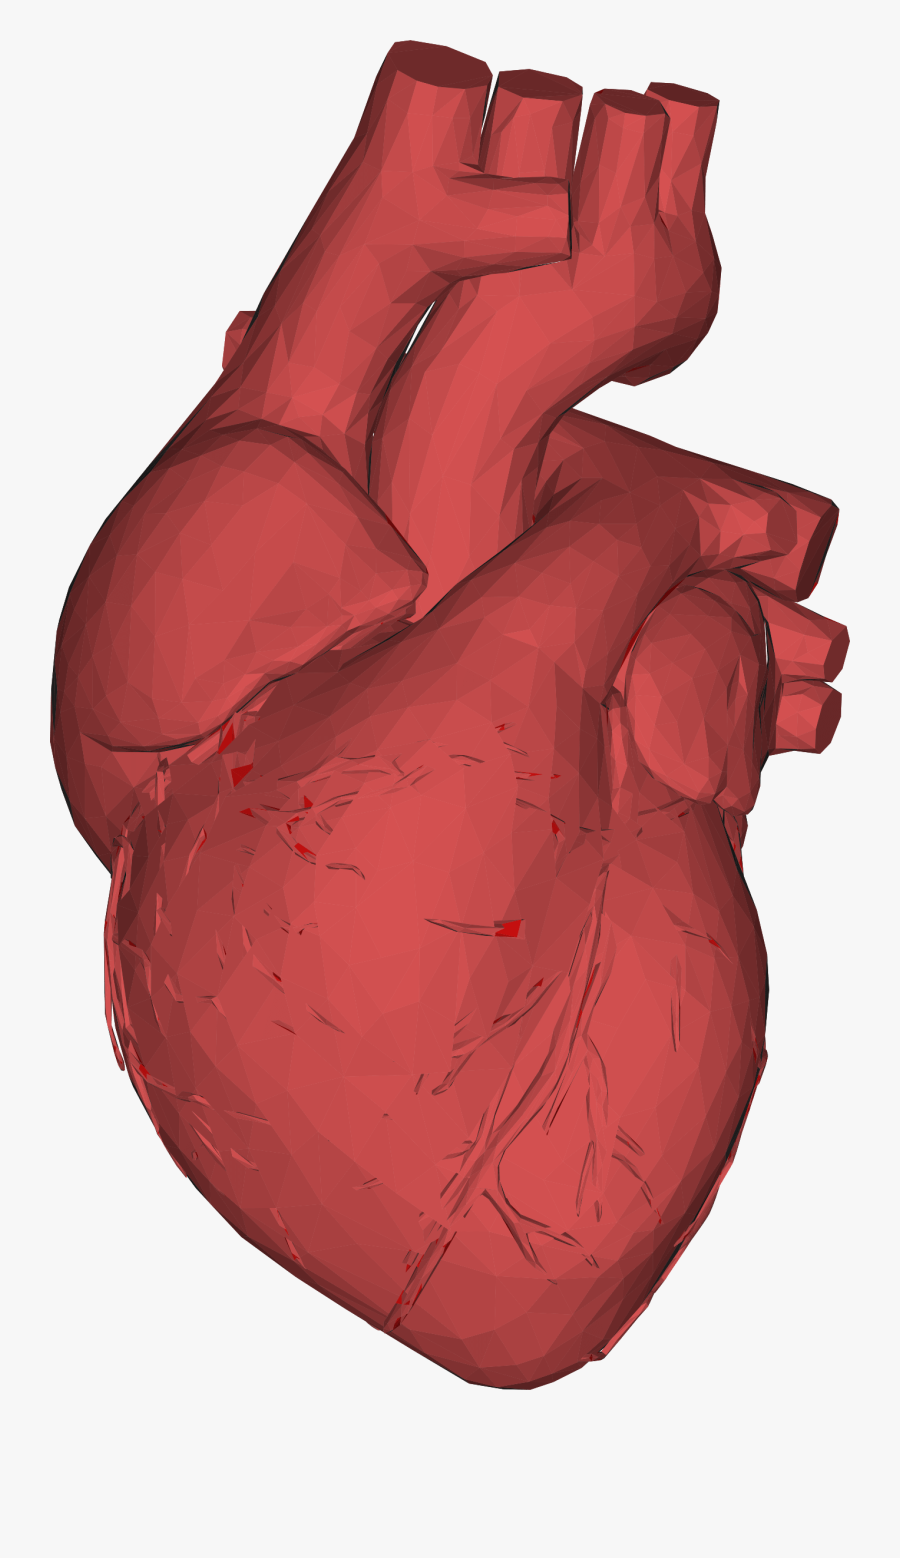 3d Computer Graphics Low Poly Heart Anatomy Thumb - Does A Heart Look Like, Transparent Clipart